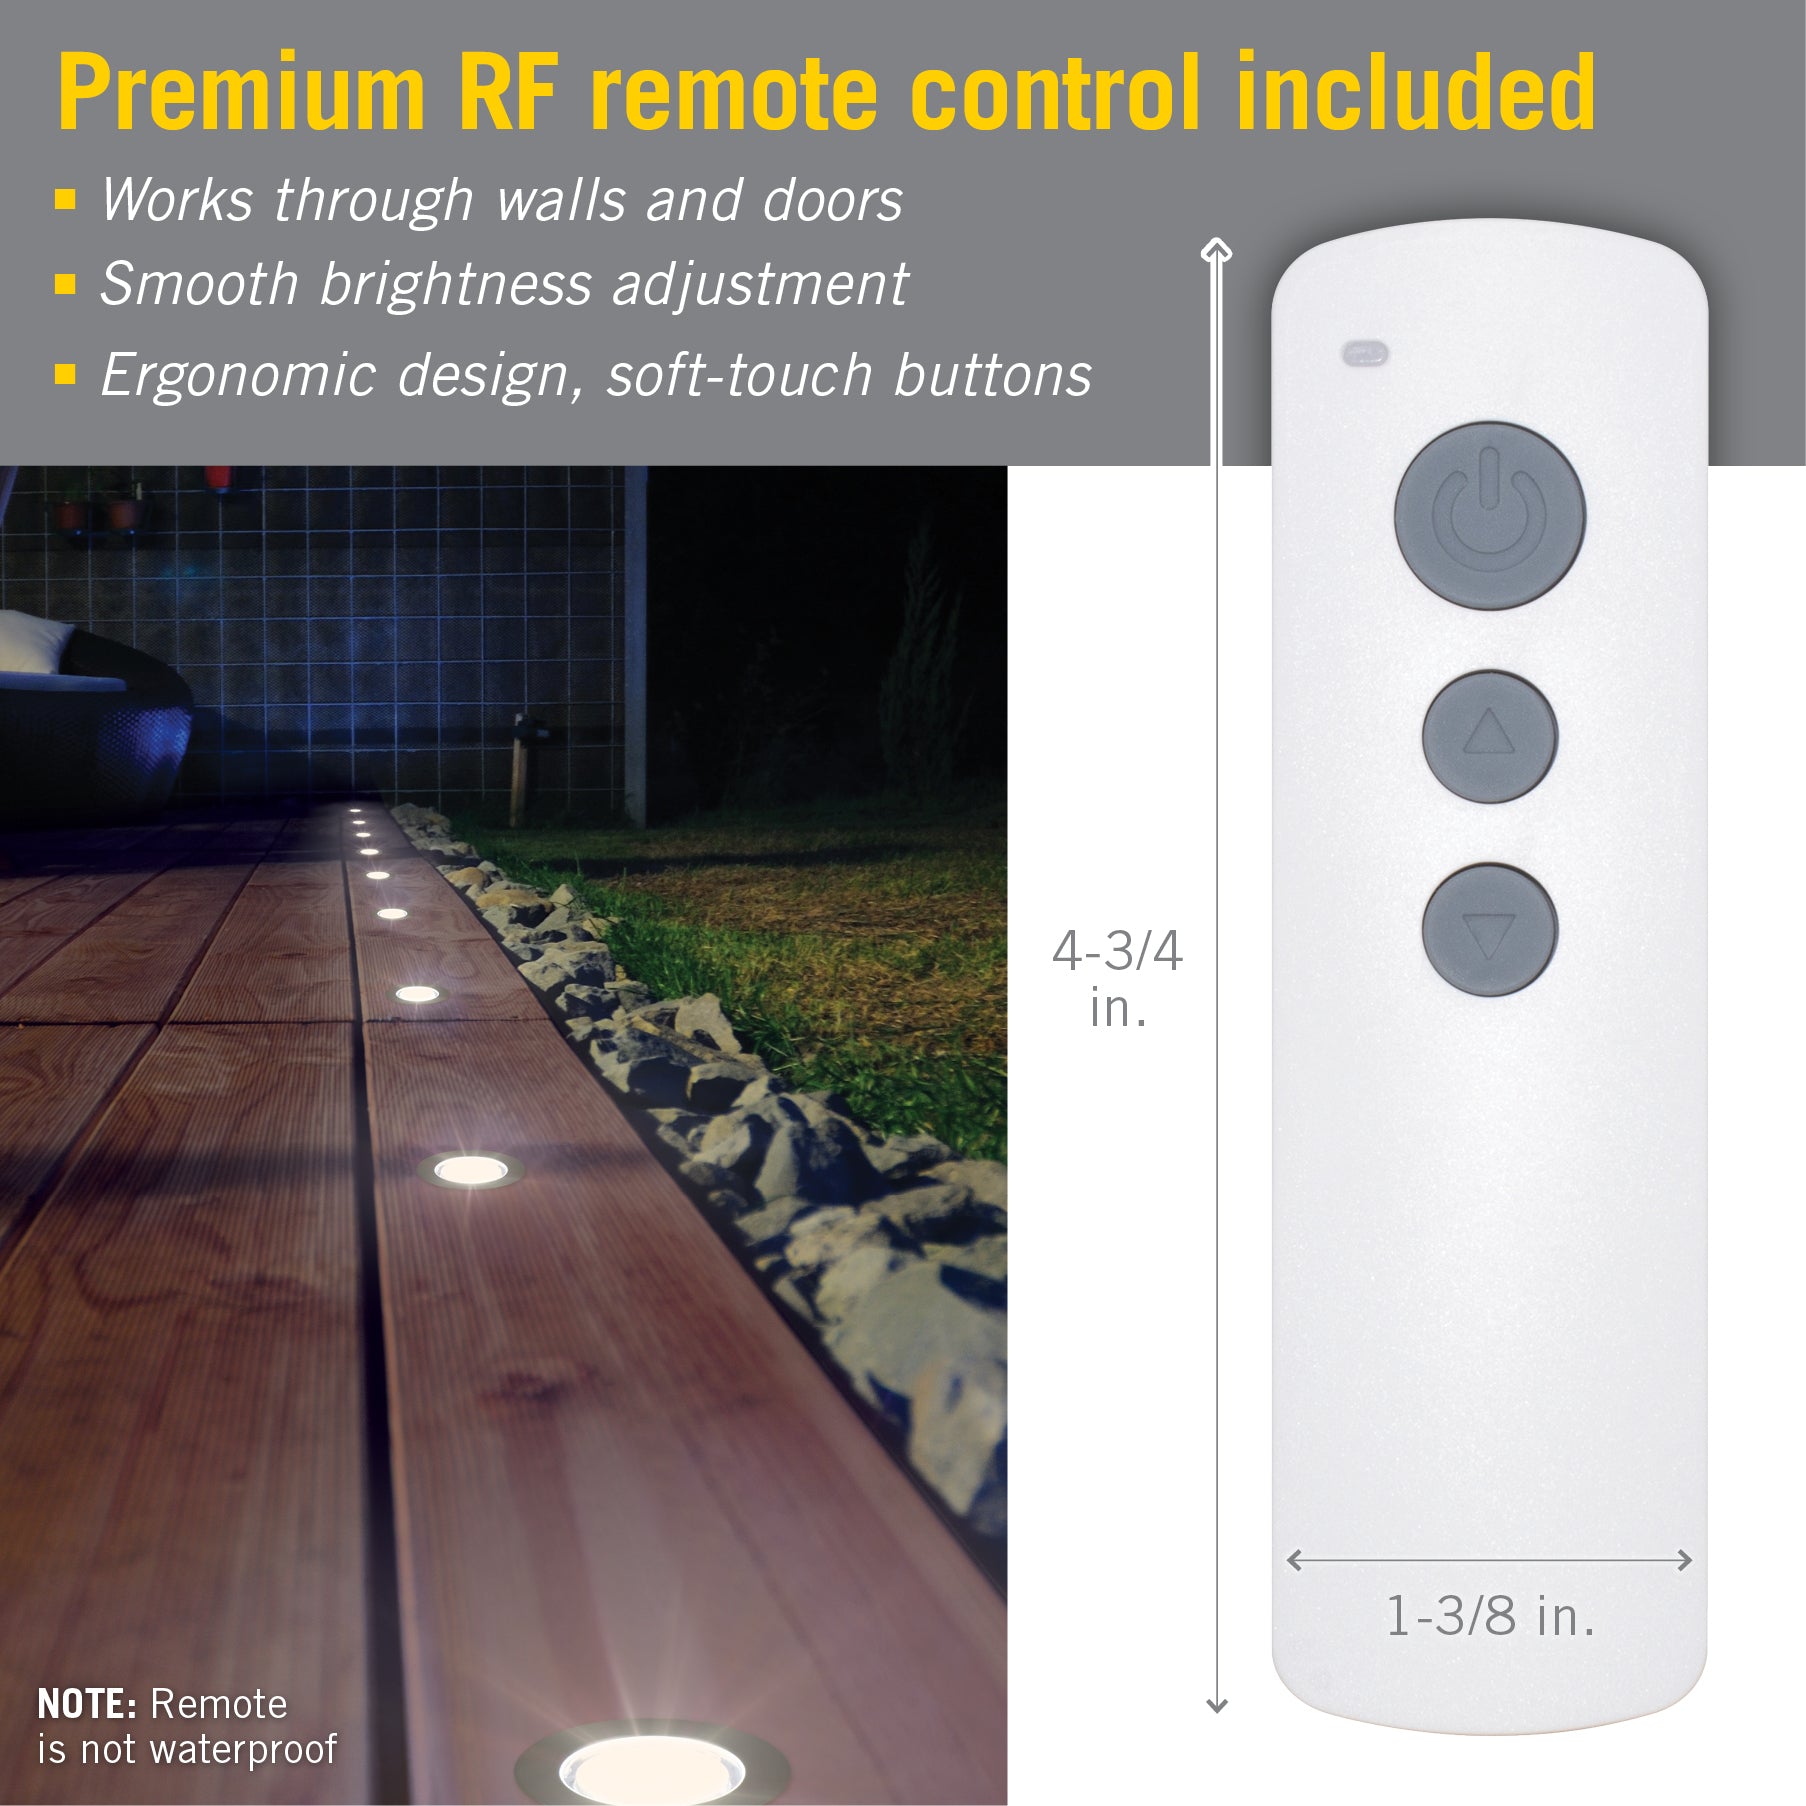 Portico Outdoor LED Light Controller